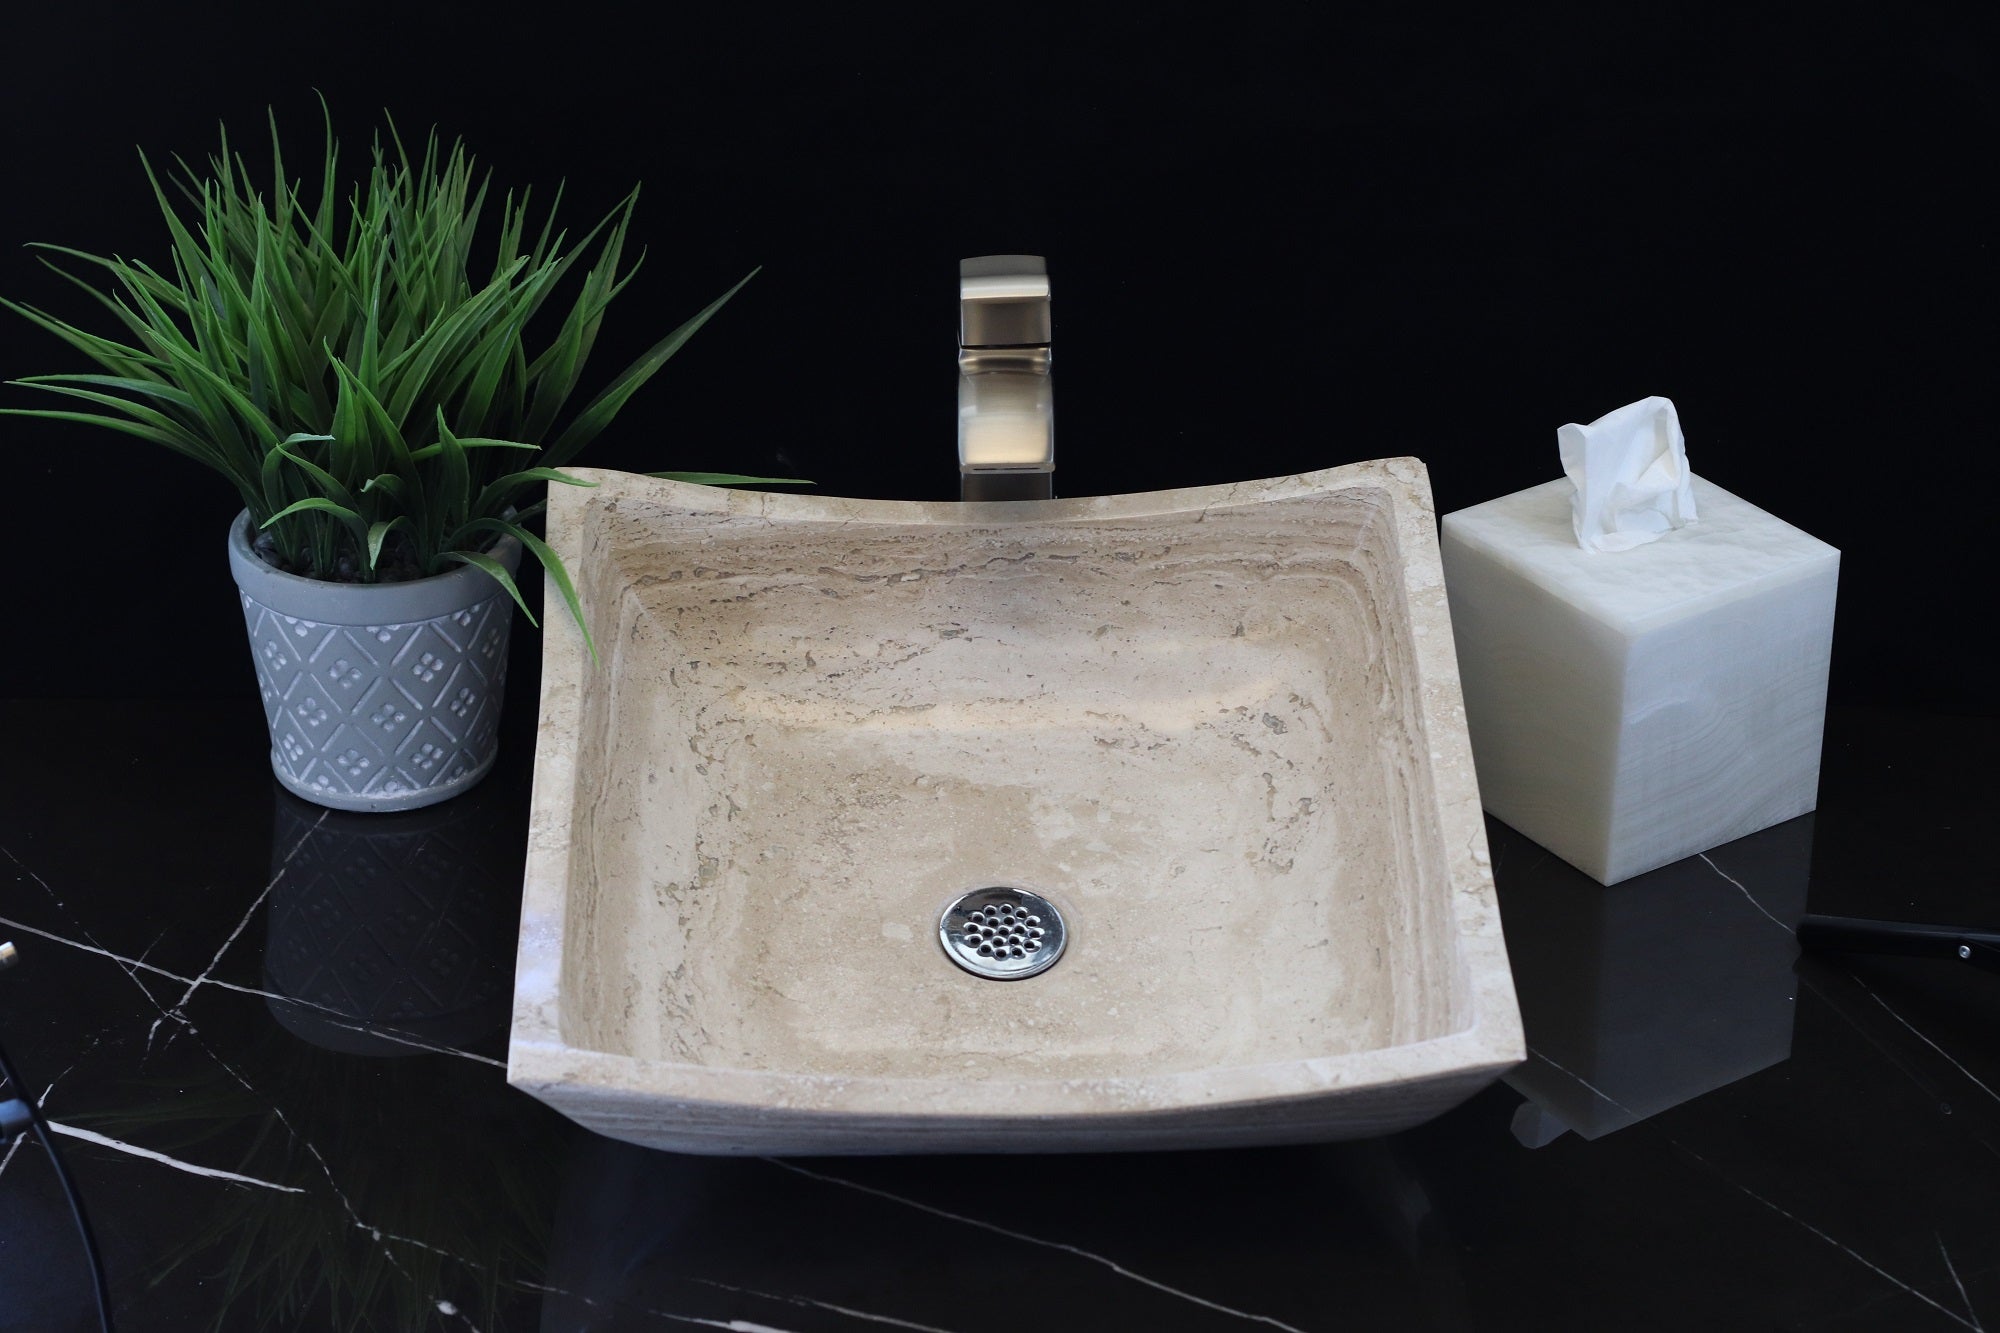 Beige Travertine Limestone Vessel Sink. A beautiful work of art. We offer fast shipping. Handmade in Mexico. We hand finish, package, and ship from the USA. Buy now at www.felipeandgrace.com. 